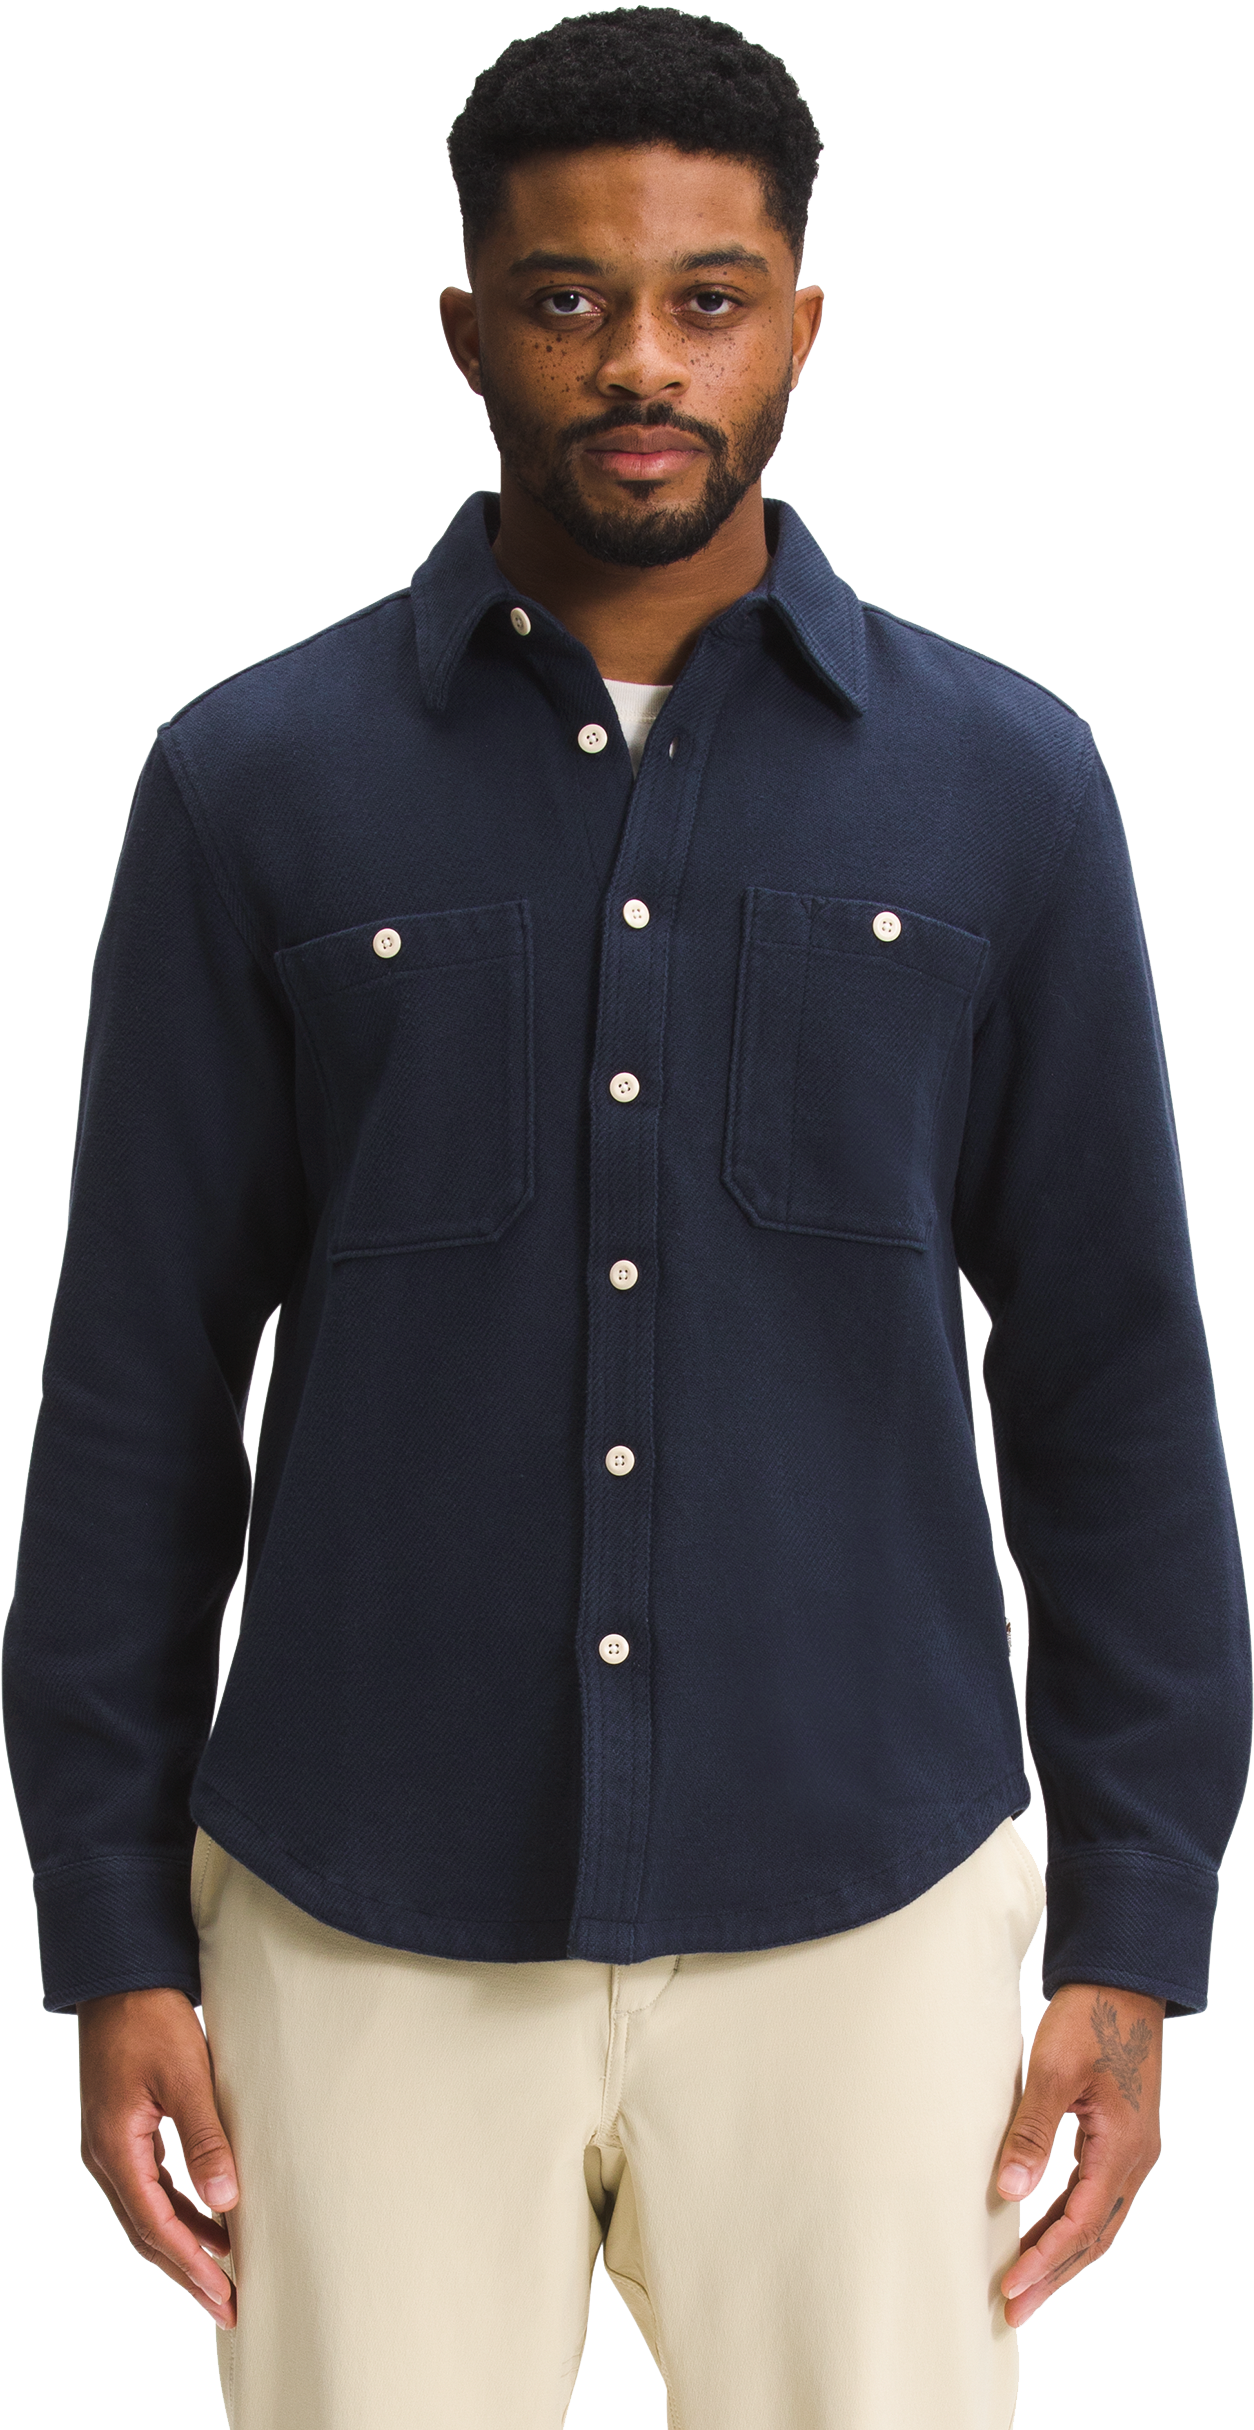 The North Face Valley Twill Flannel Long-Sleeve Shirt for Men - Aviator Navy - 2XL